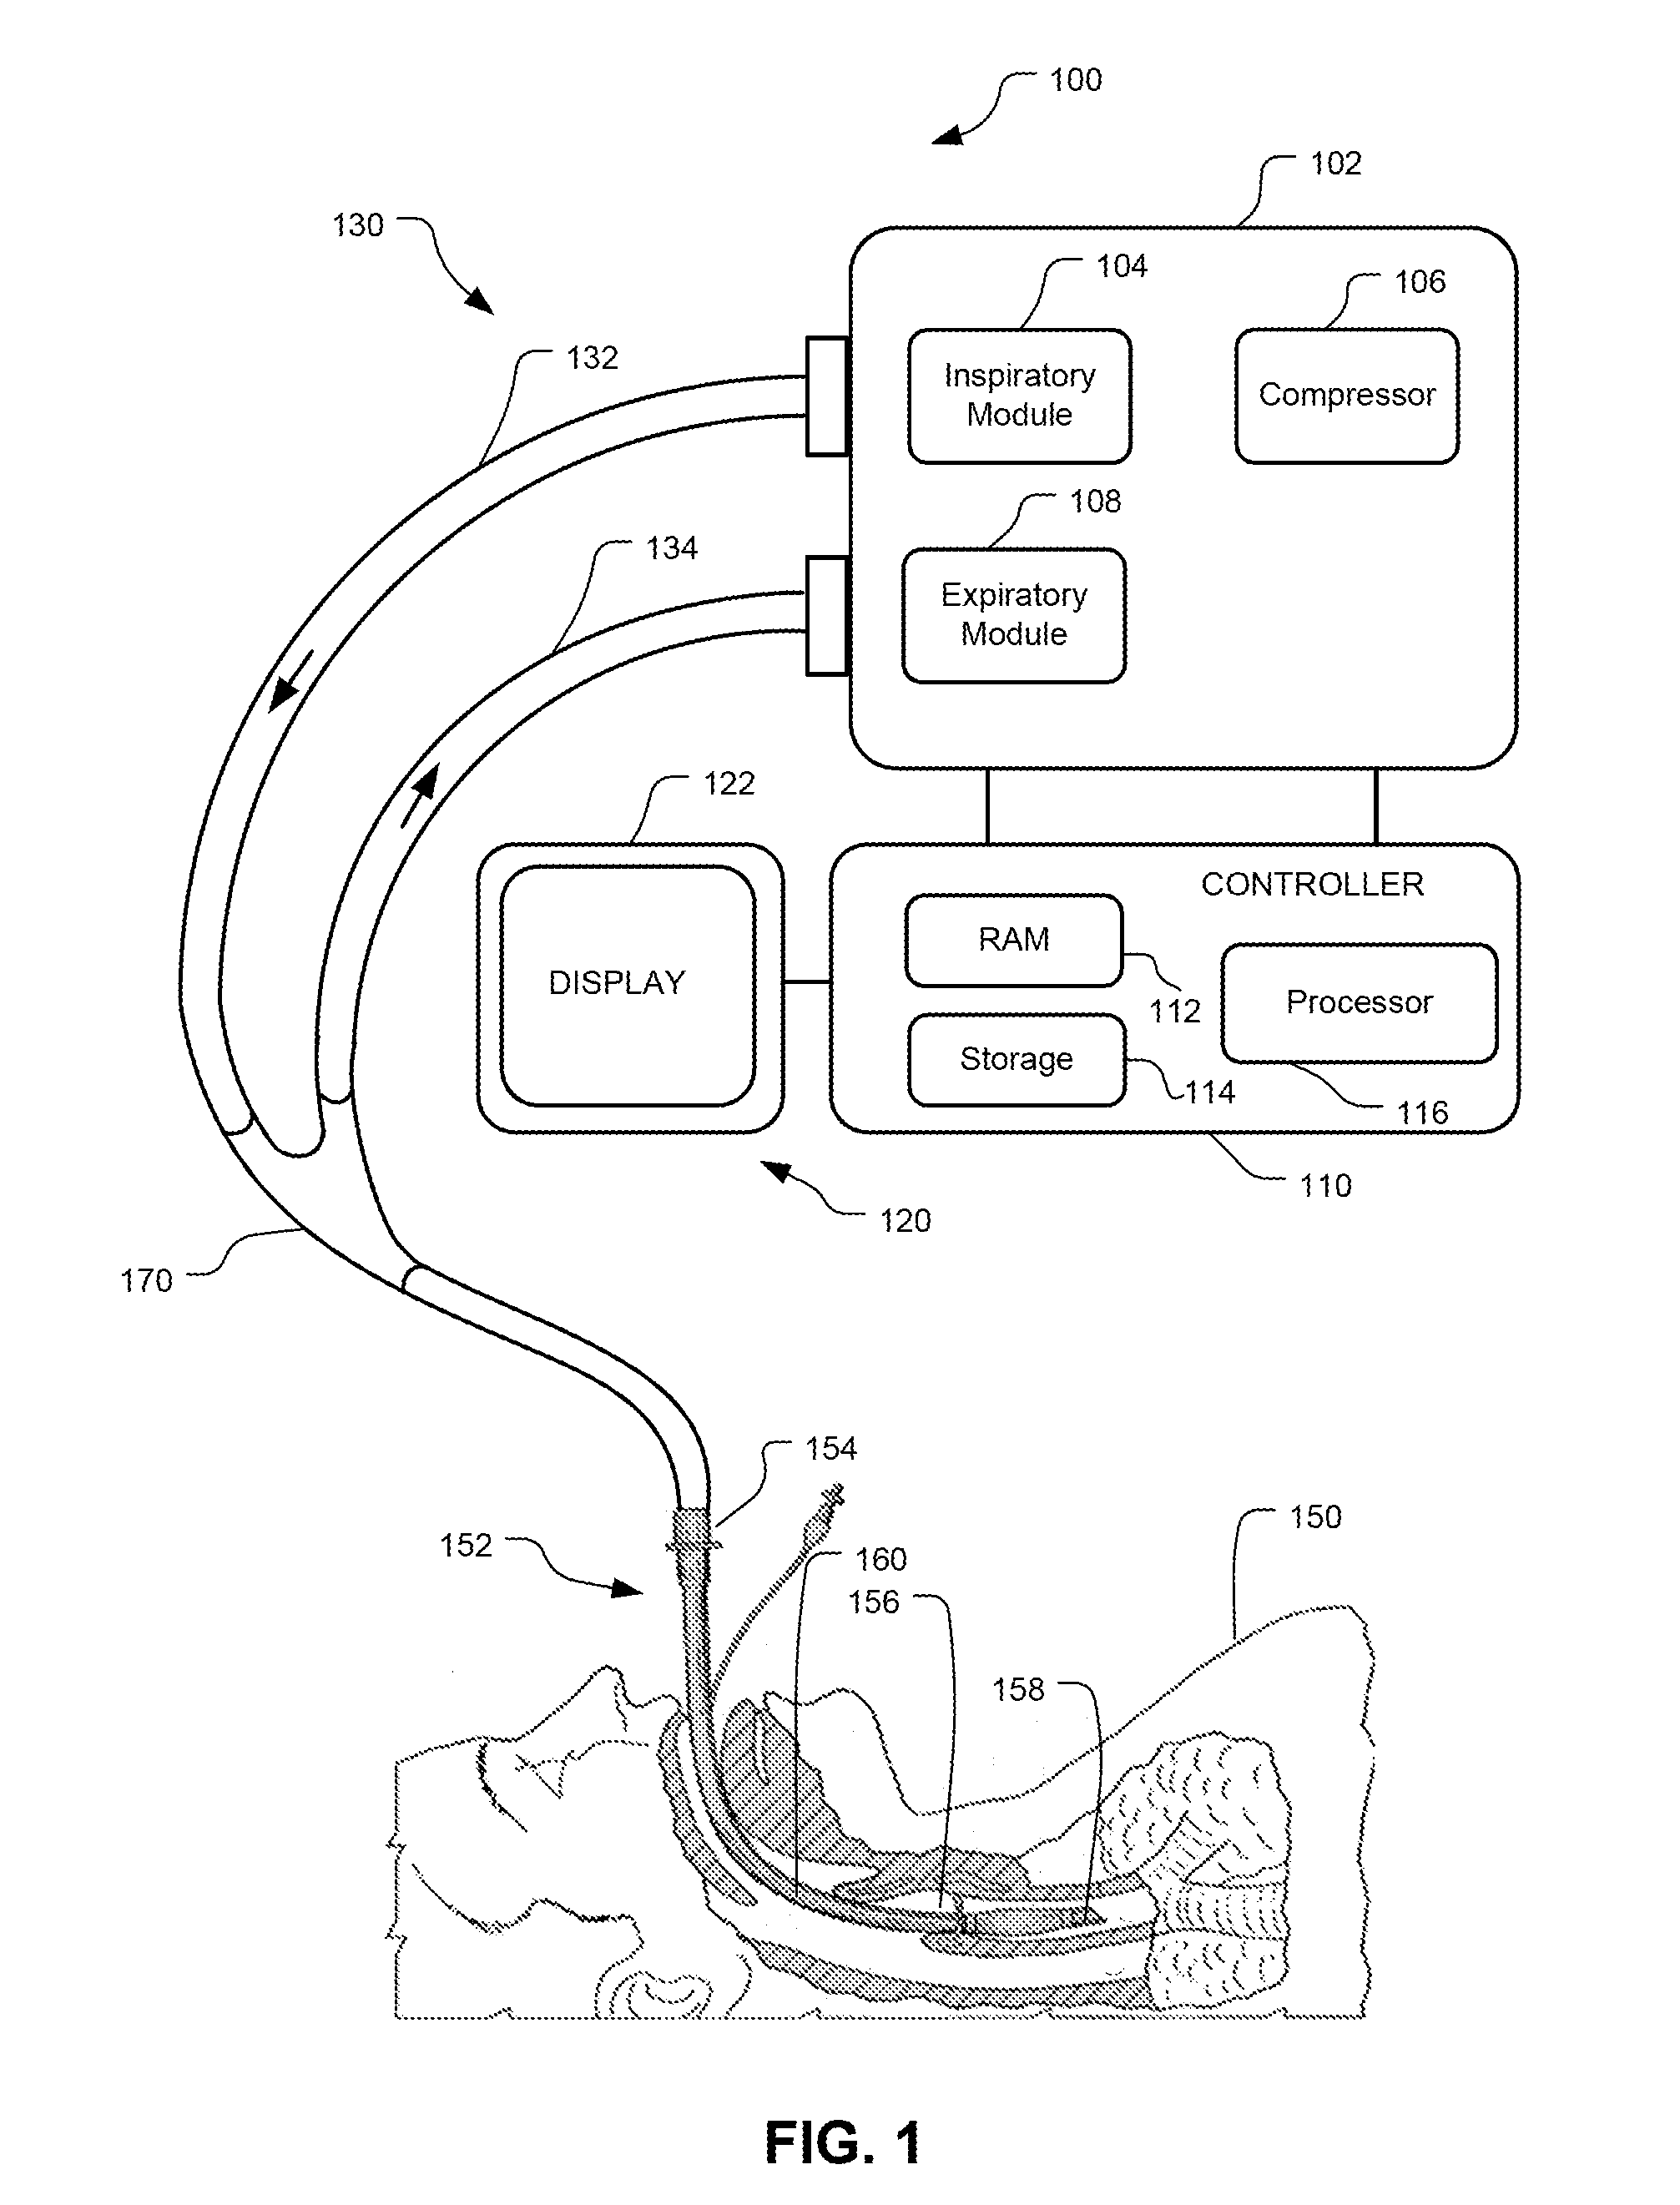 Method And System For Delivering A Multi-Breath, Low Flow Recruitment Maneuver